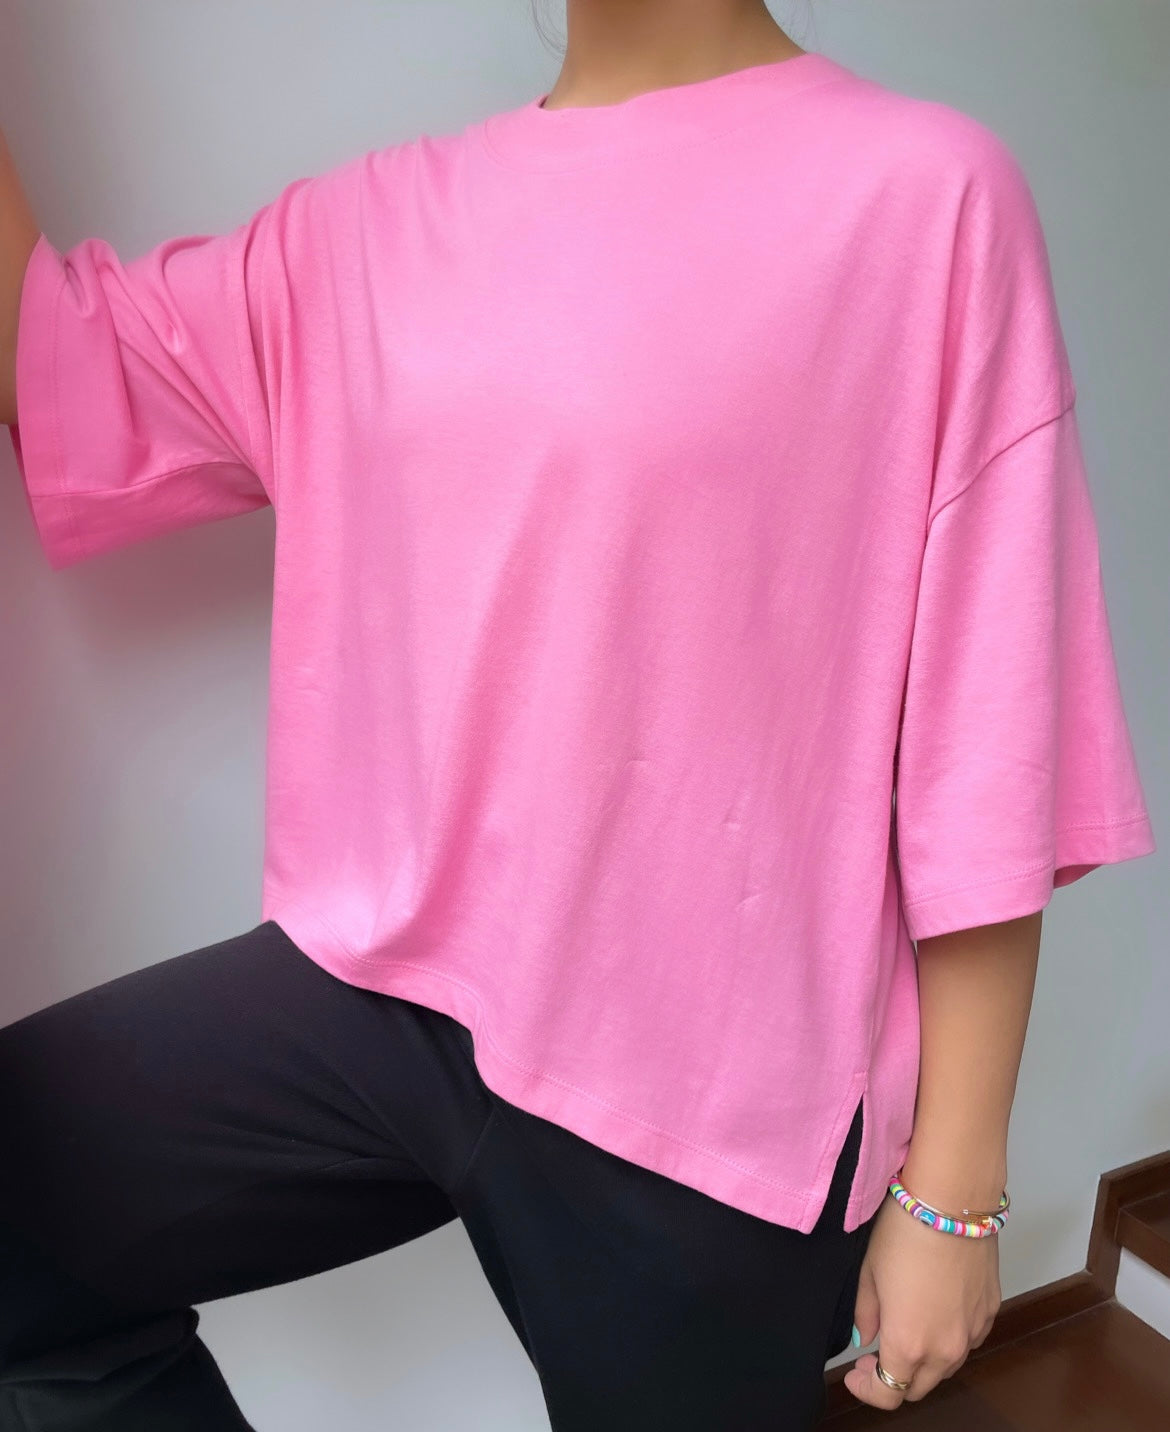 The Boxy Crop Tee in Candy Pink